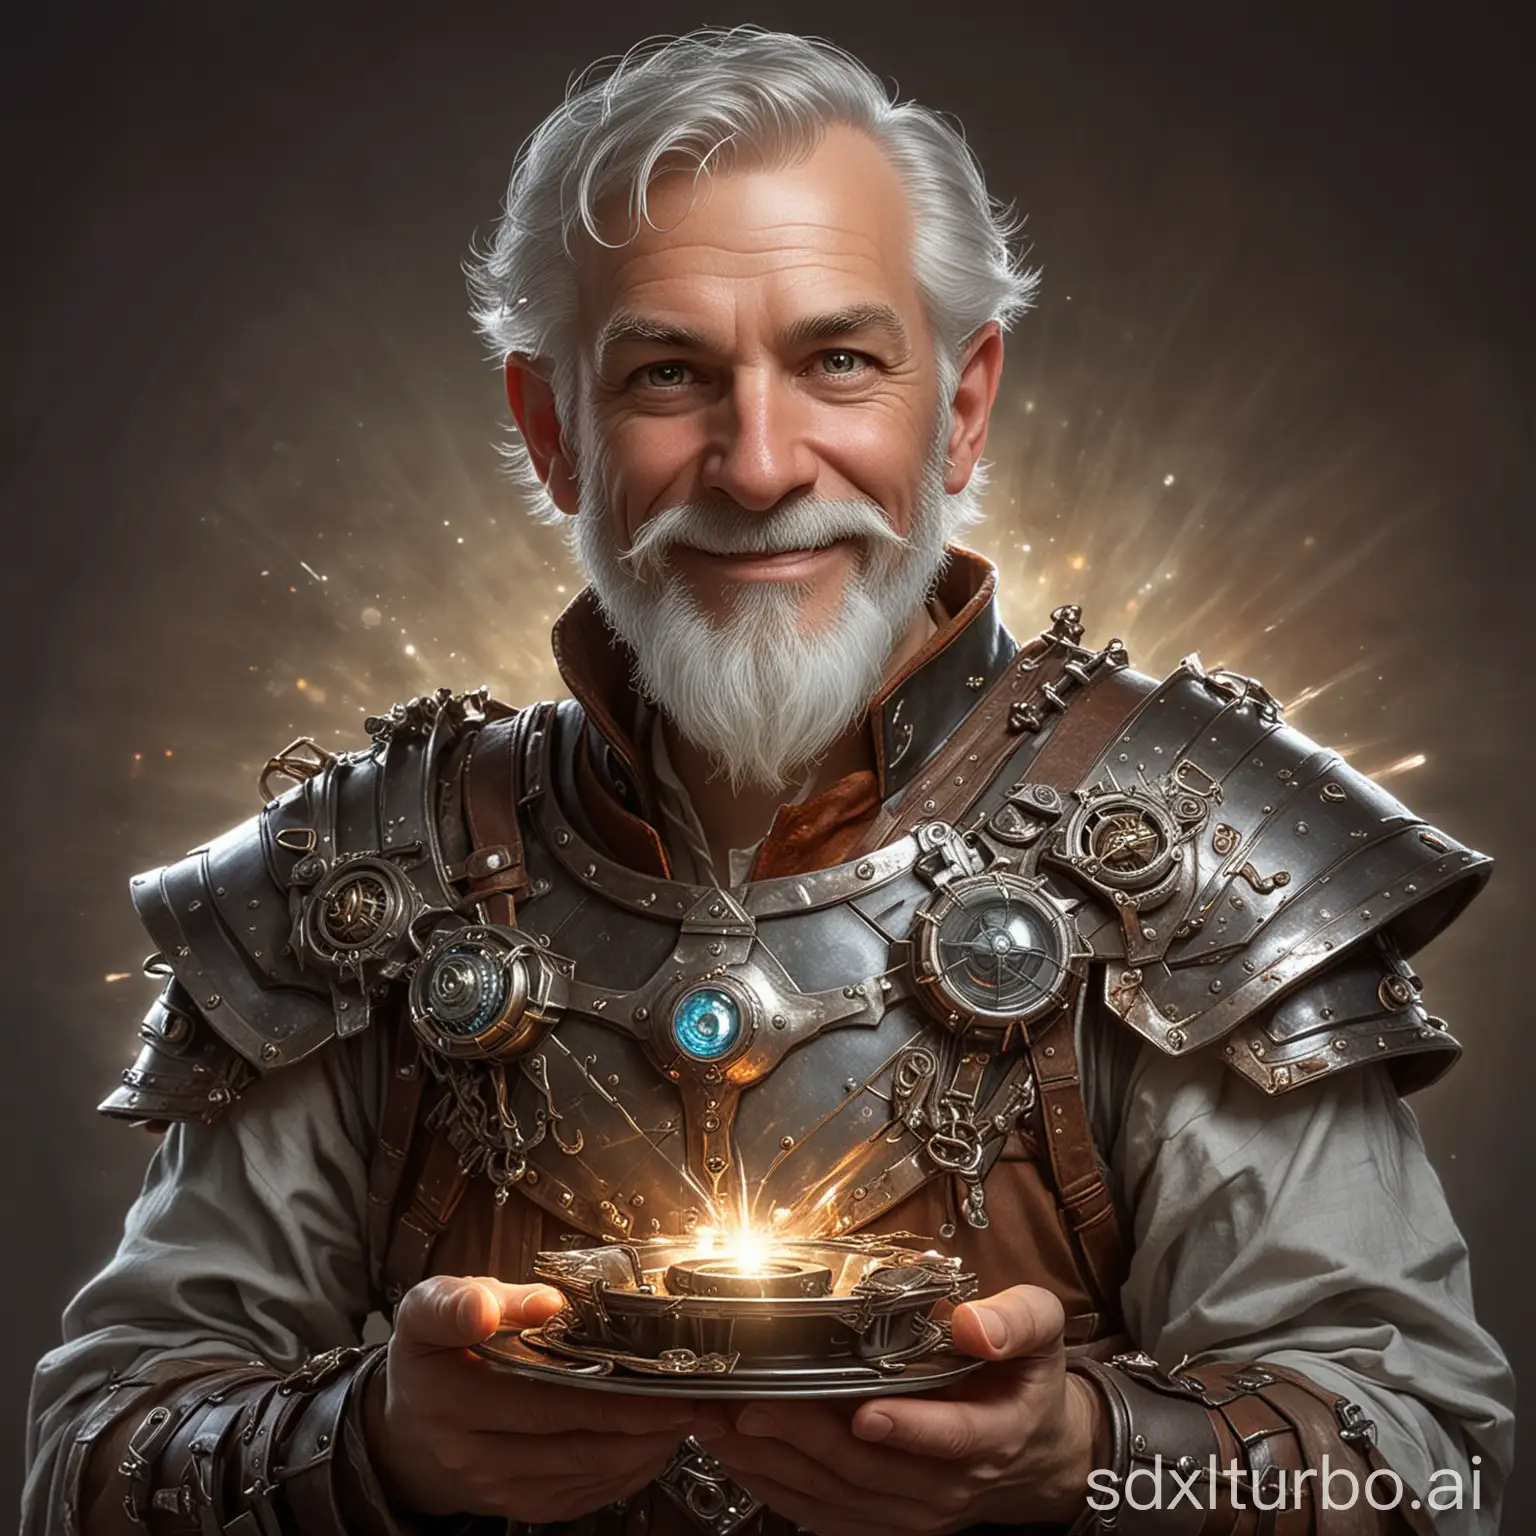 Create a high resolution image about "Dungeons & Dragons" and "Artificer". Show a contemplative man of 35 years with a short, grey beard wearing a magic-steampunk plate-armor. He smiles benignly while holding a gizmo and a spark in his hand. Also his eyes sparkle with a hint of white magic.